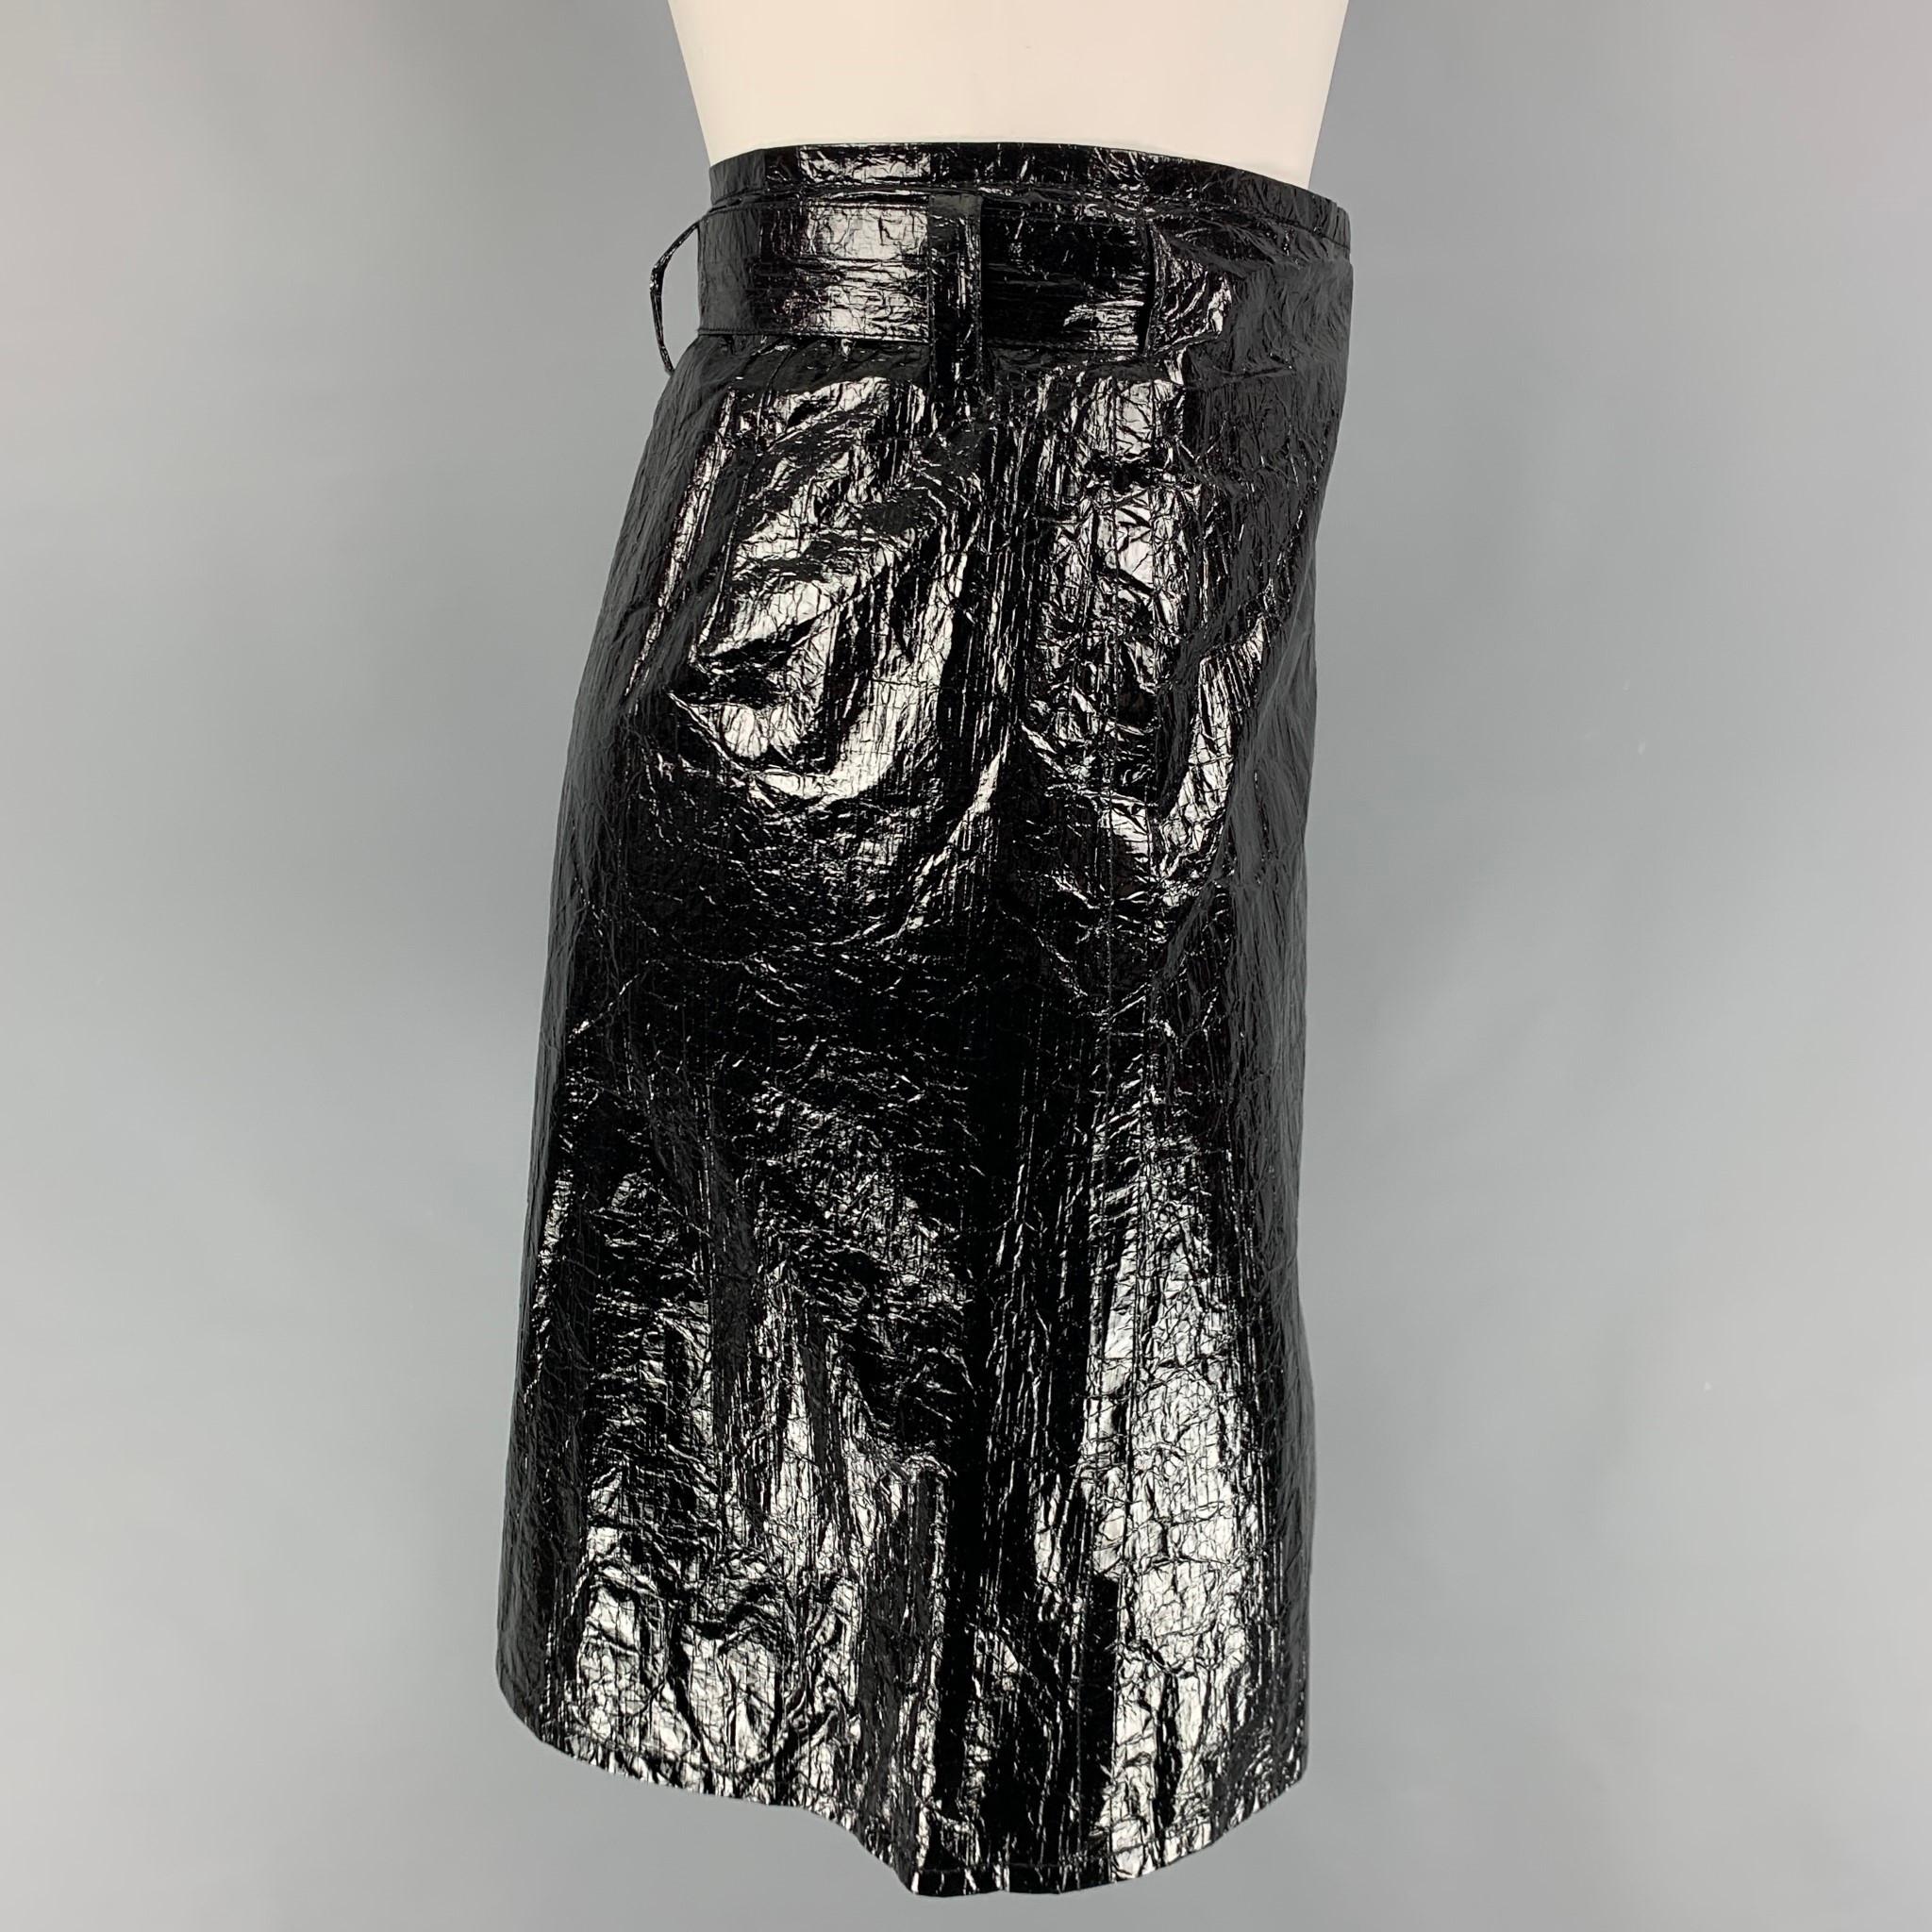 HELMUT LANG skirt comes in a black wrinkled polyurethane featuring a wrap style, adjustable belt, and a single button closure. 

New With Tags.
Marked: XS
Original Retail Price: $425.00

Measurements:

Waist: 26 in.
Hip: 34 in.
Length: 18 in. 